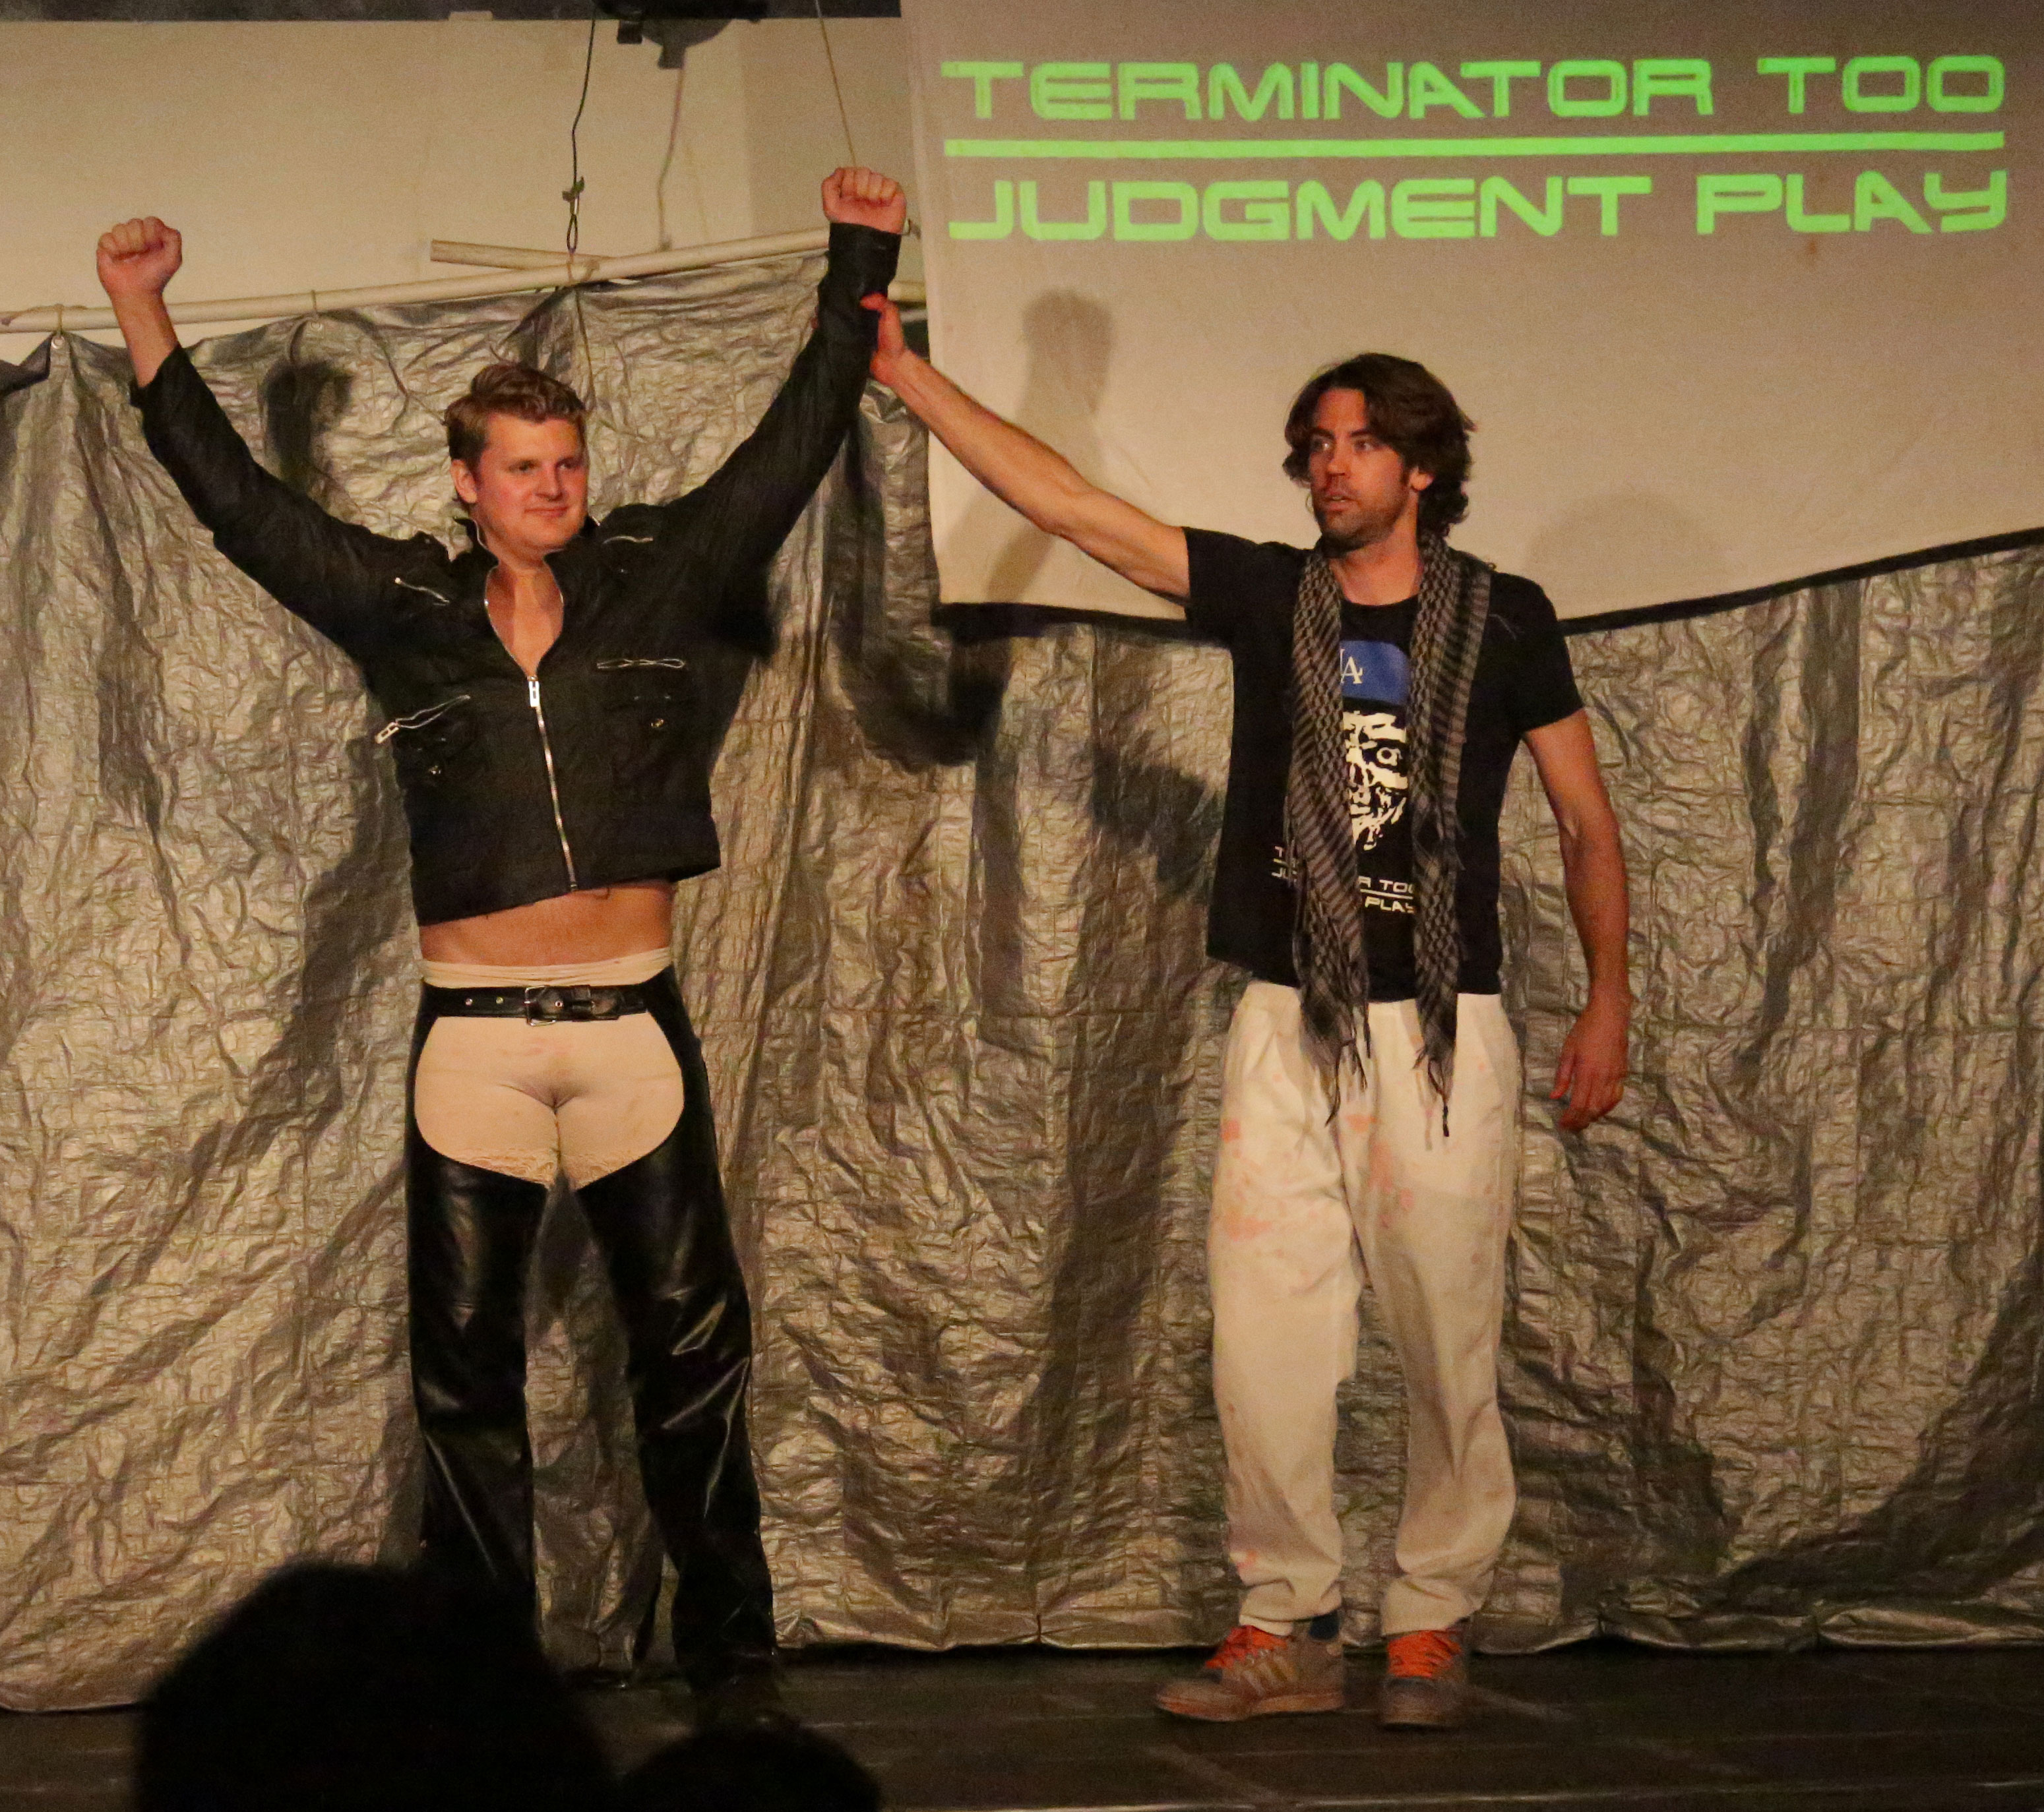 Terminator Too: Judgment Play in Los Angeles and San Francisco